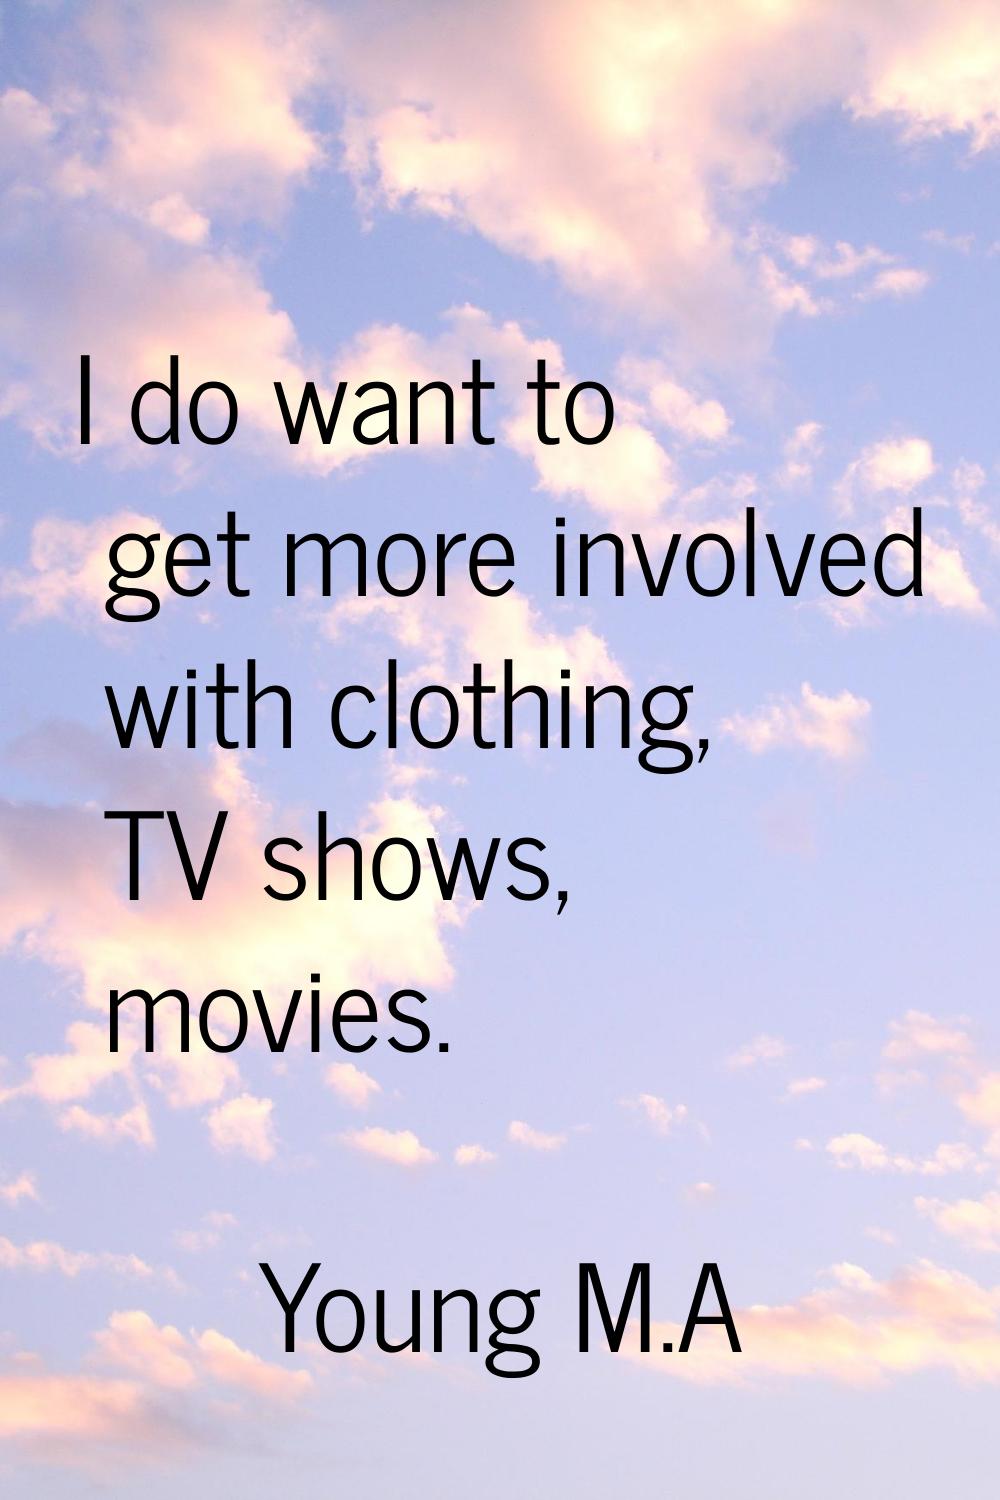 I do want to get more involved with clothing, TV shows, movies.